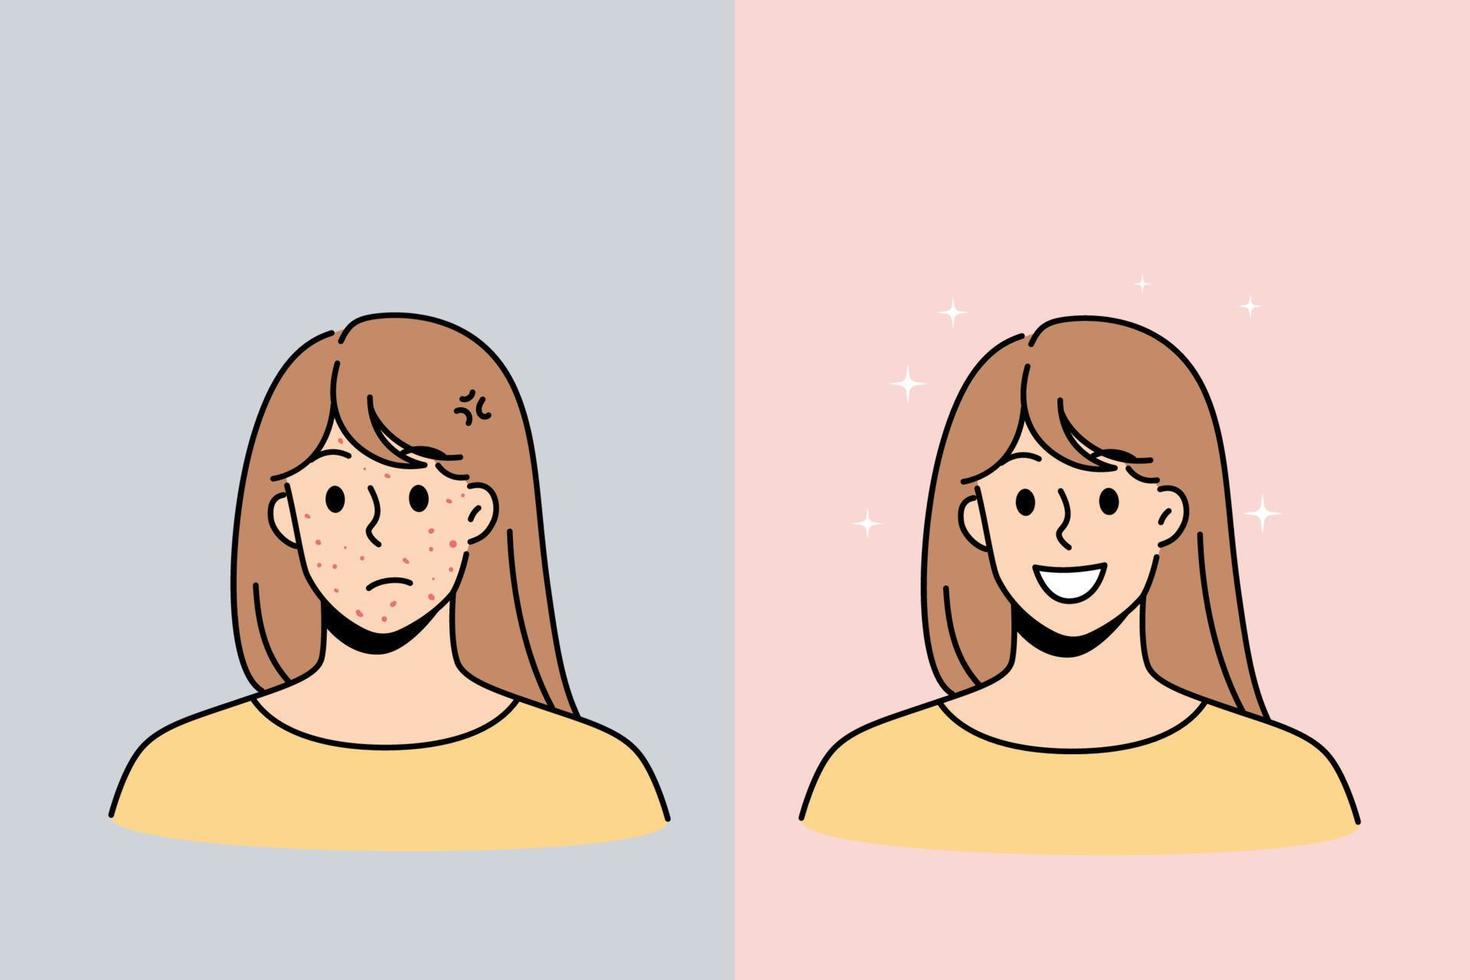 Skin problem and health concept. Stressed unhappy young woman with red acne pimples and smiling with healthy skin face vector illustration